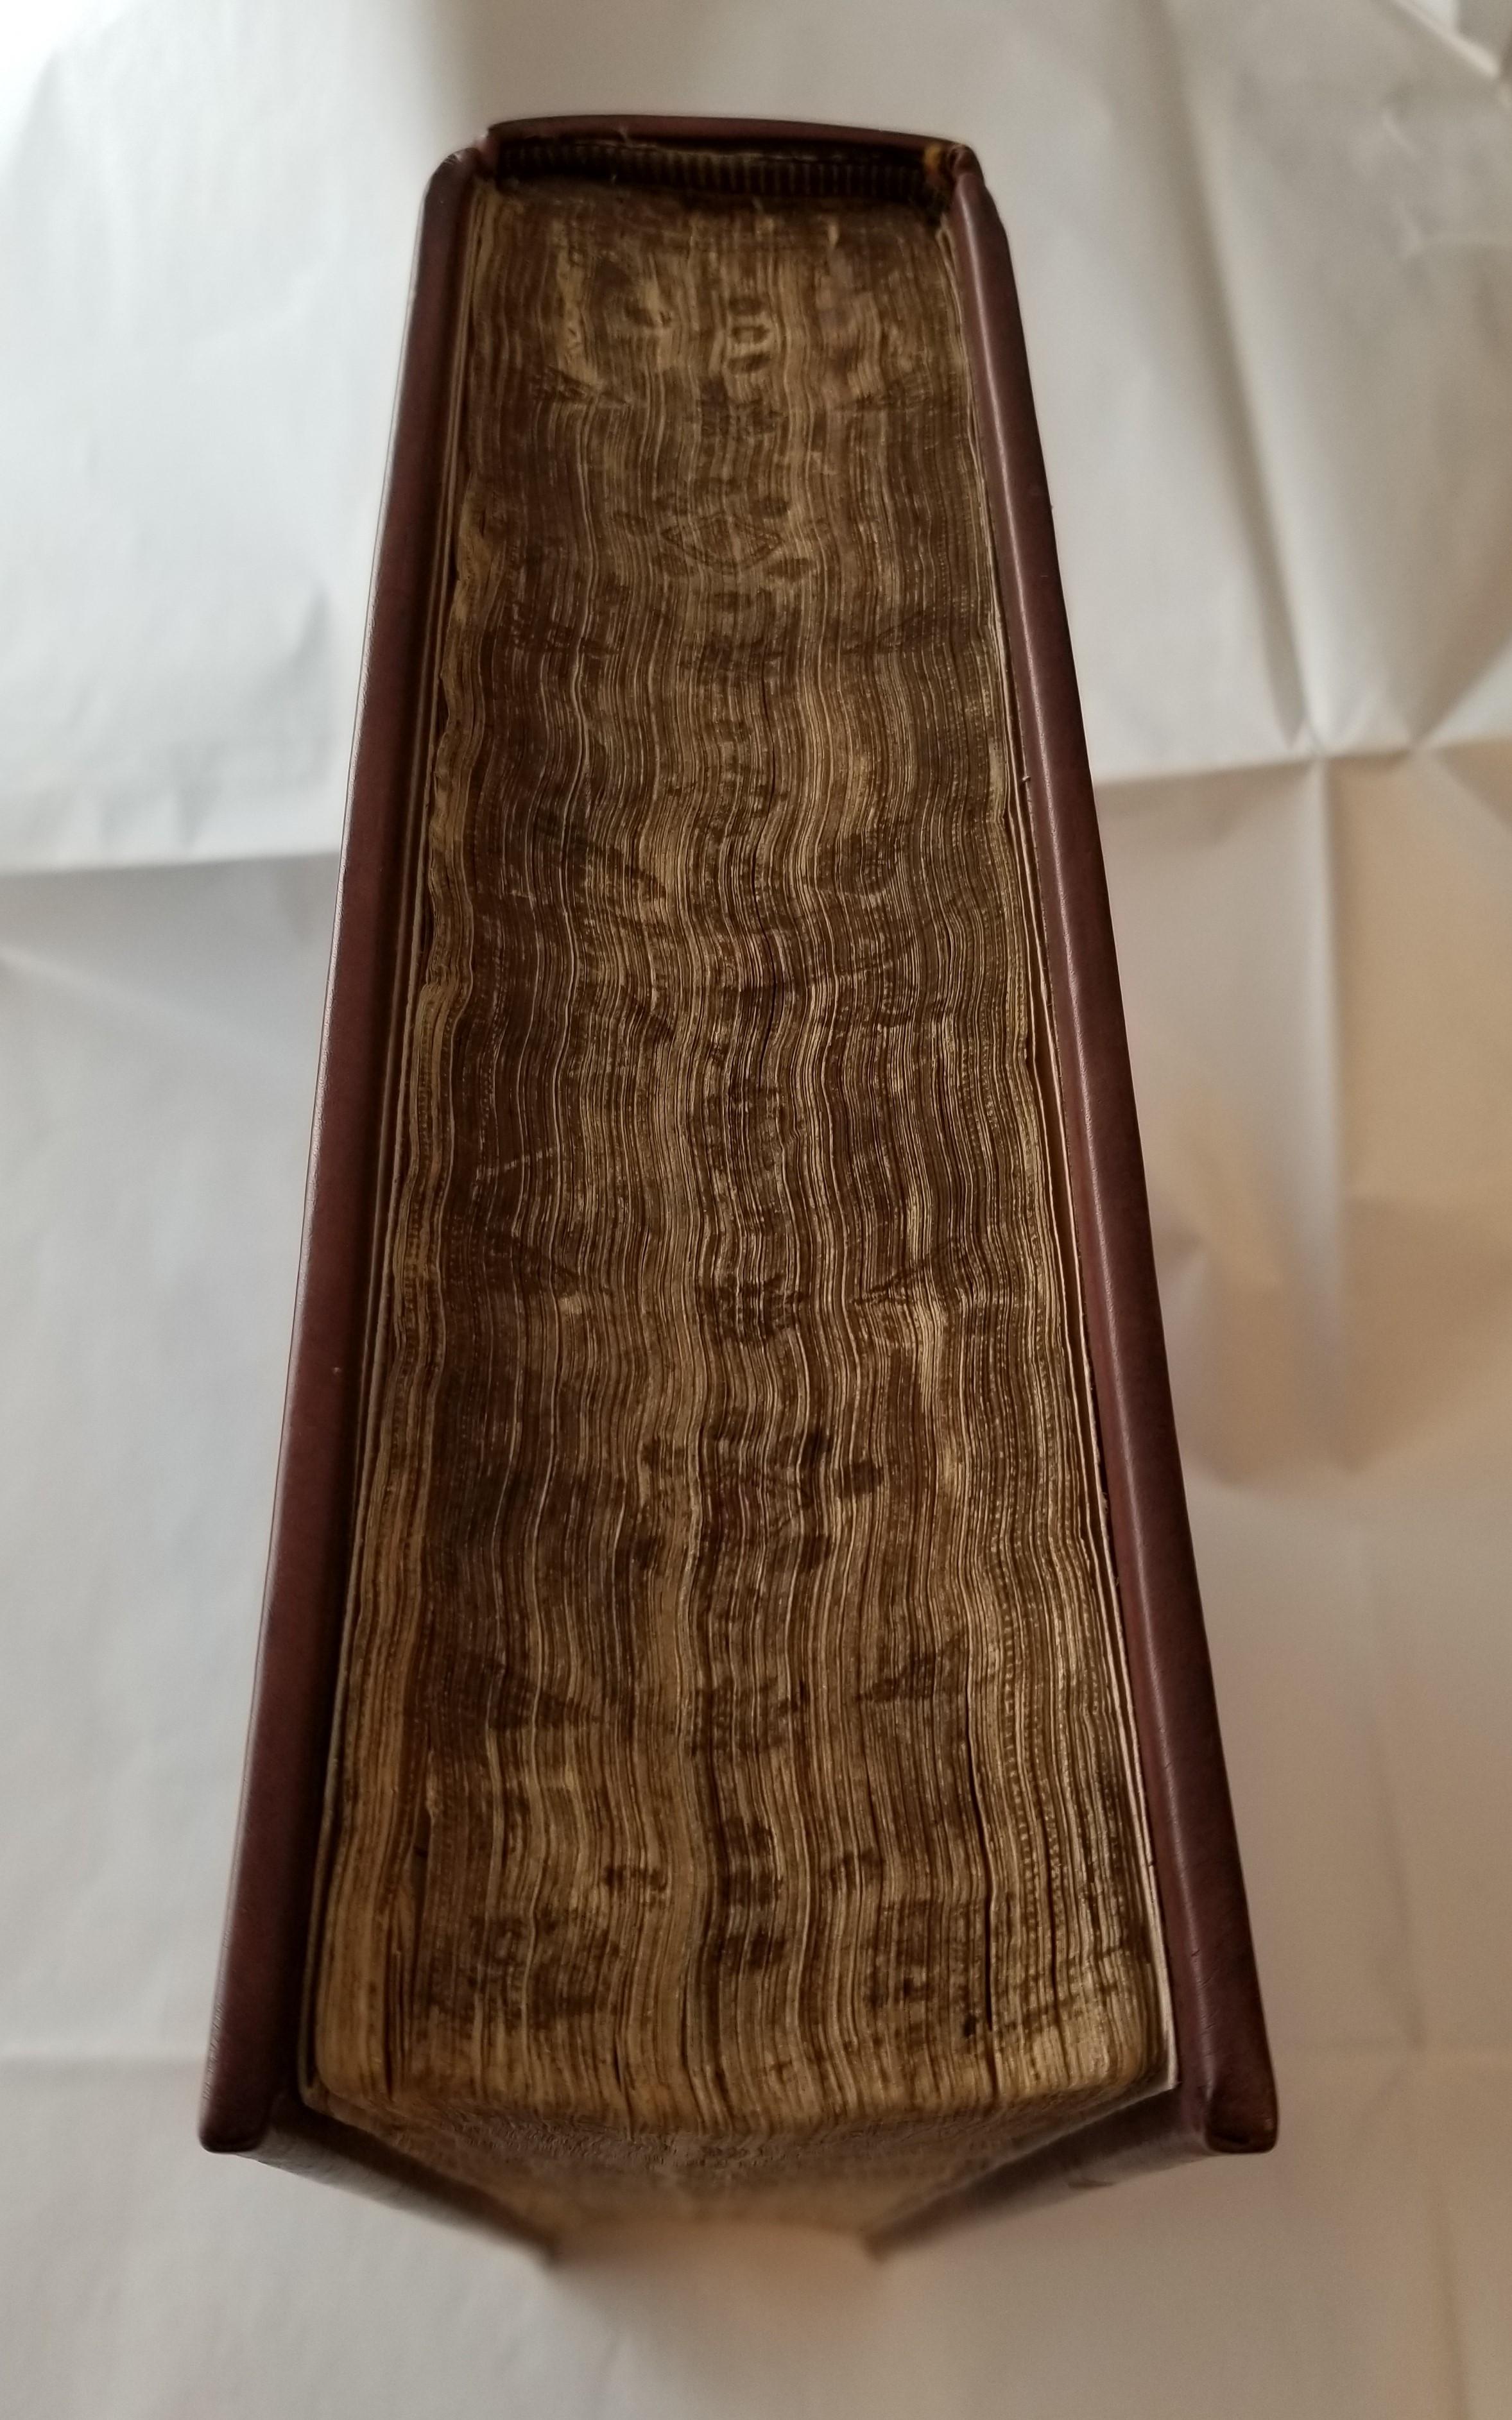 1629 Complete Cambridge Bible King James First Edition Folio Title Engraving For Sale 8